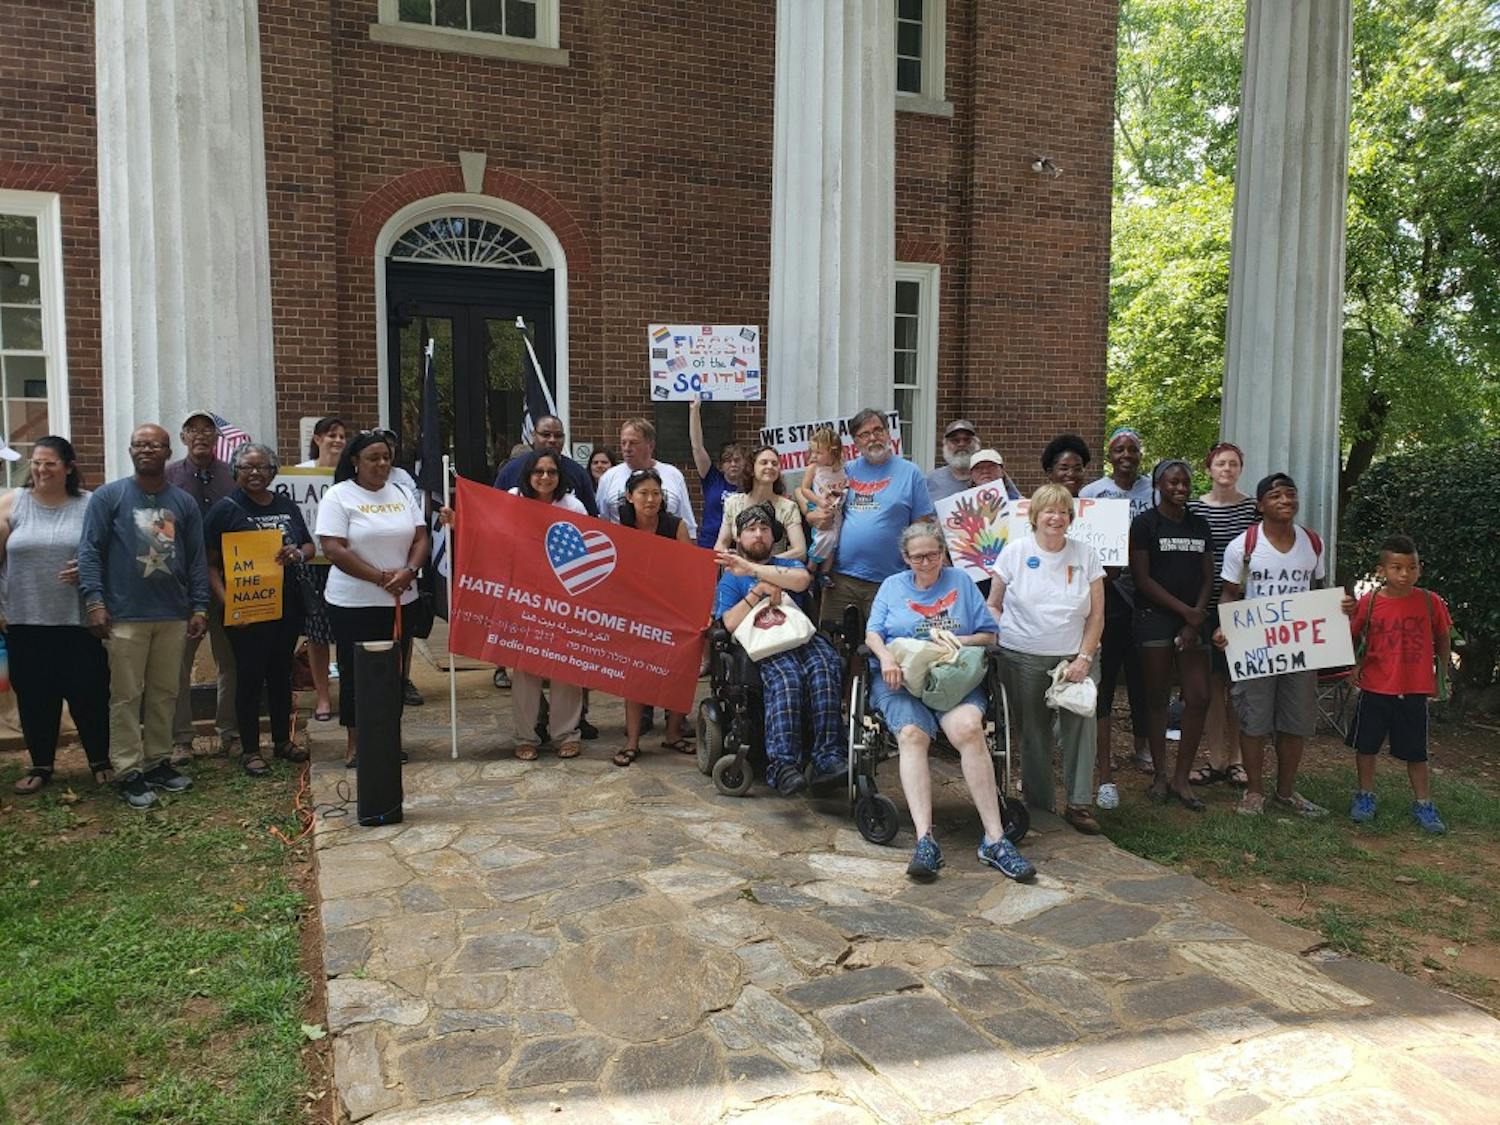 The Hate-Free Schools Coalition sponsored an emergency press conference in front of the historic Orange County Courthouse in Hillsborough on Aug. 10 to call for stricter gun reform.